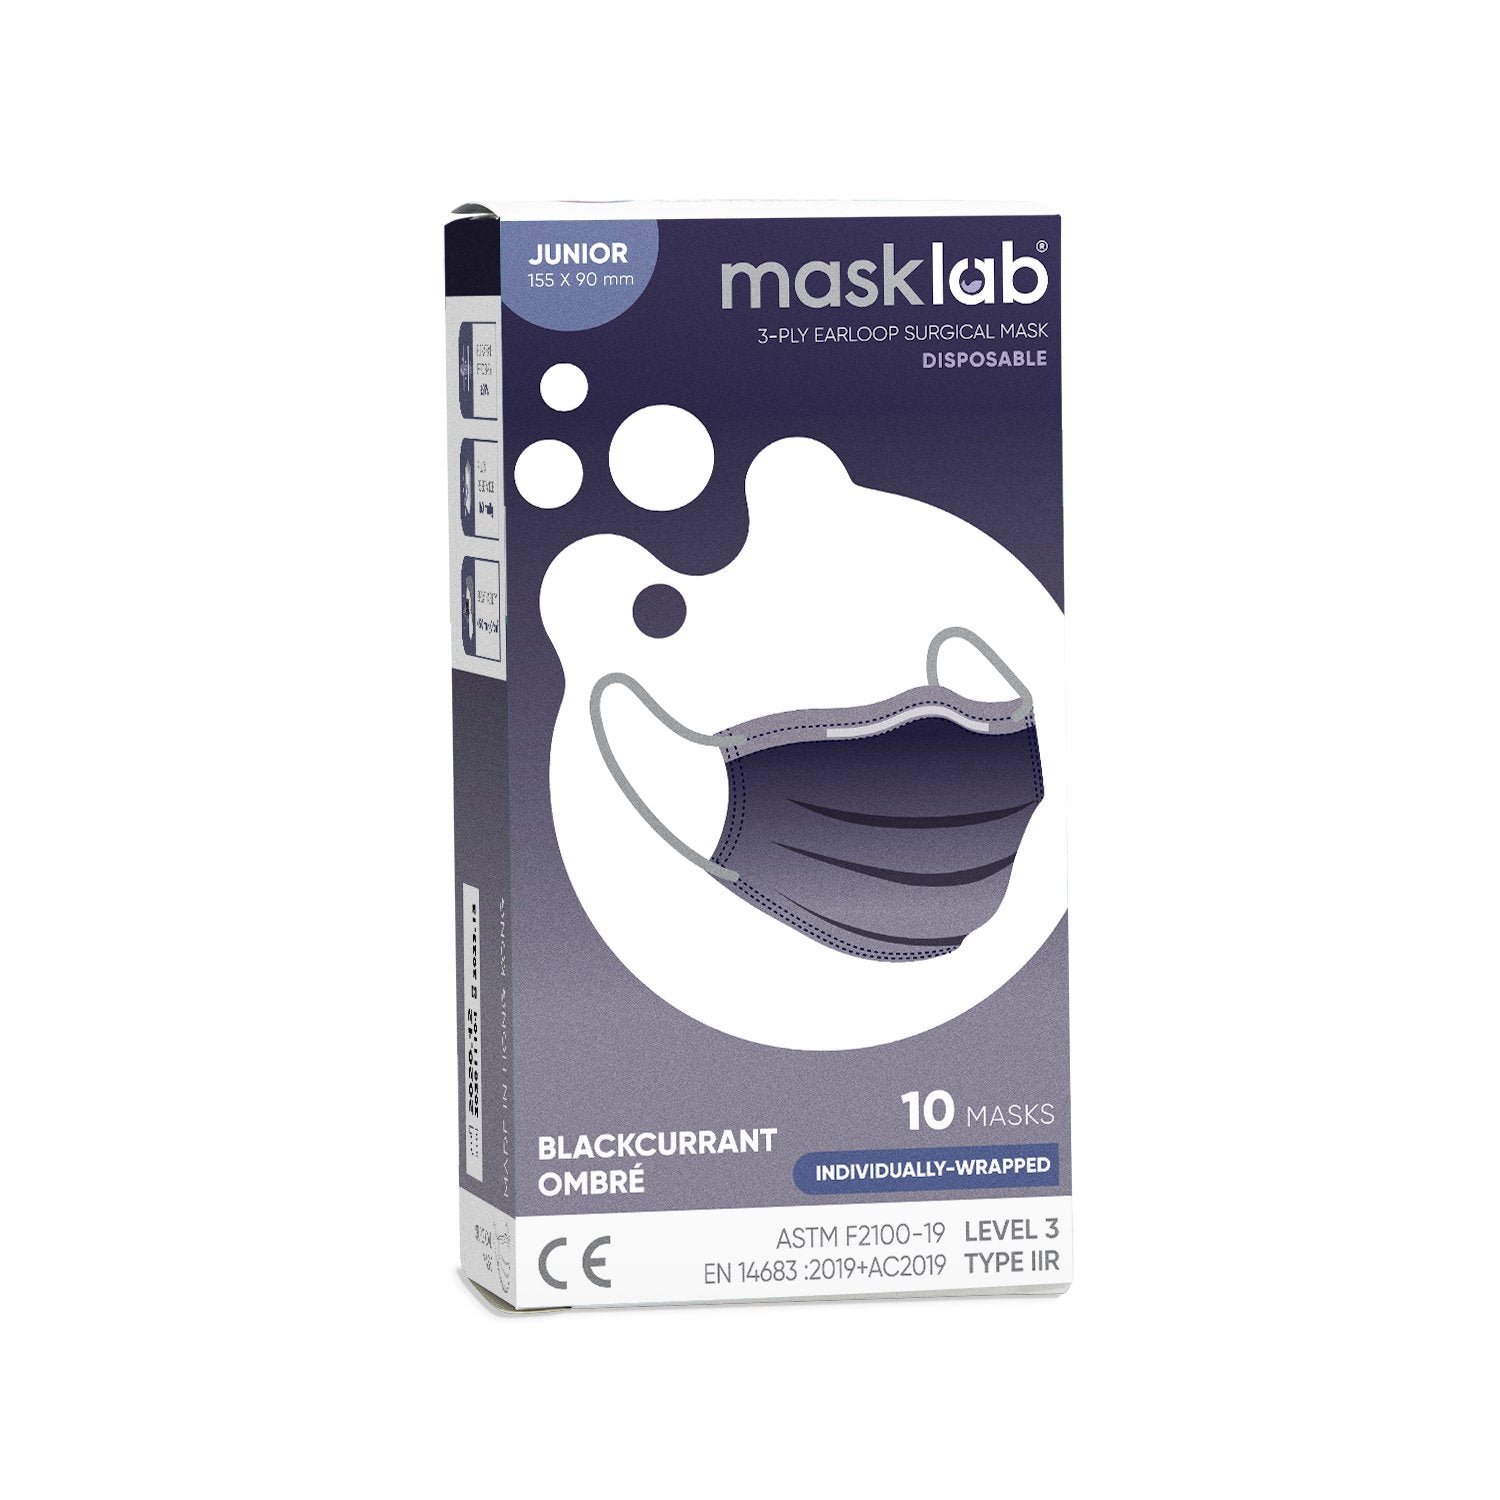 masklab™ Blackcurrant Ombré Junior Size 3-ply Surgical Mask 2.0+ (Box of 10, Individually-wrapped)